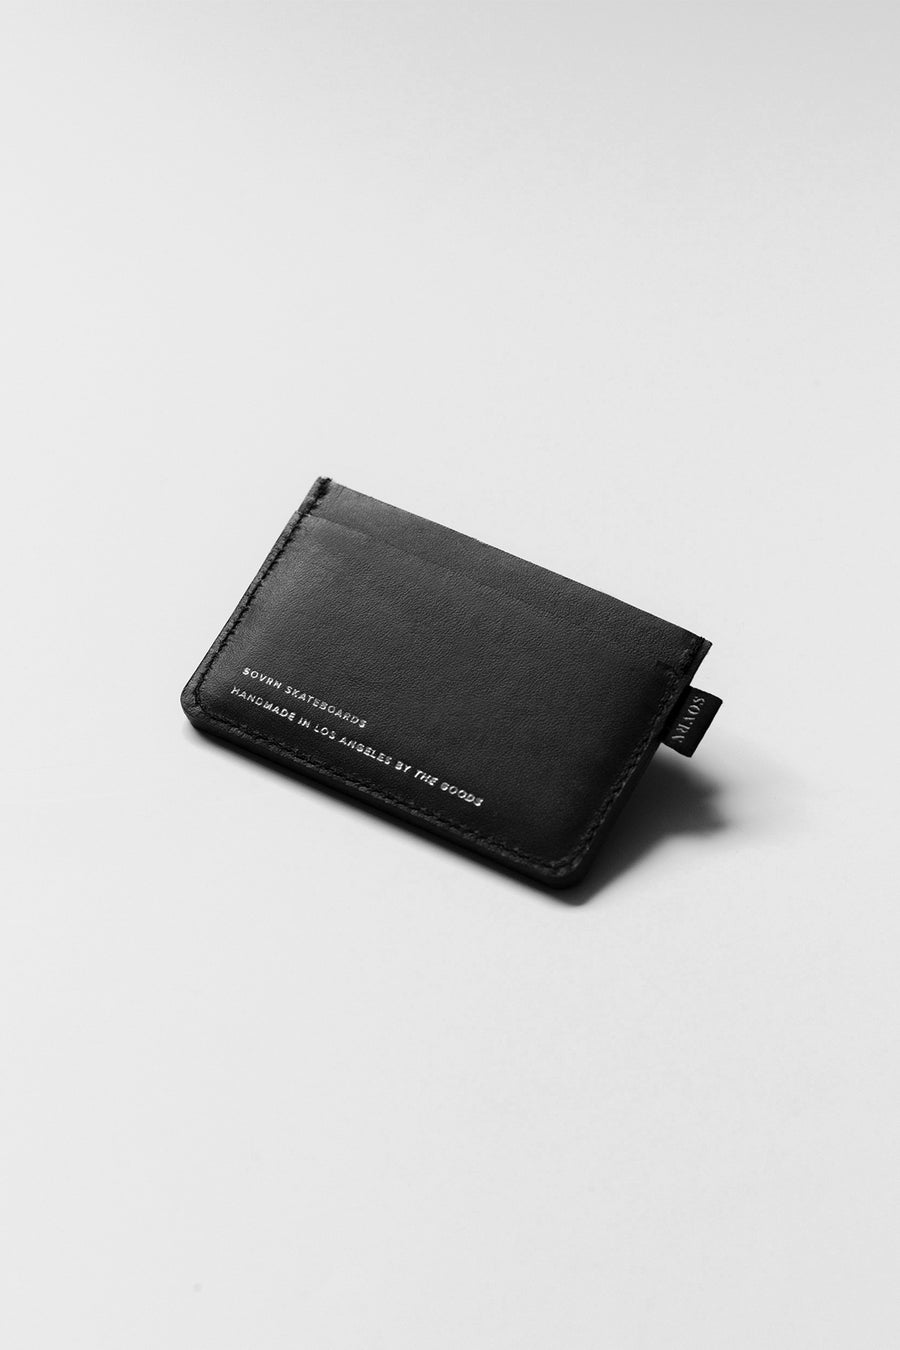 THE WALLET